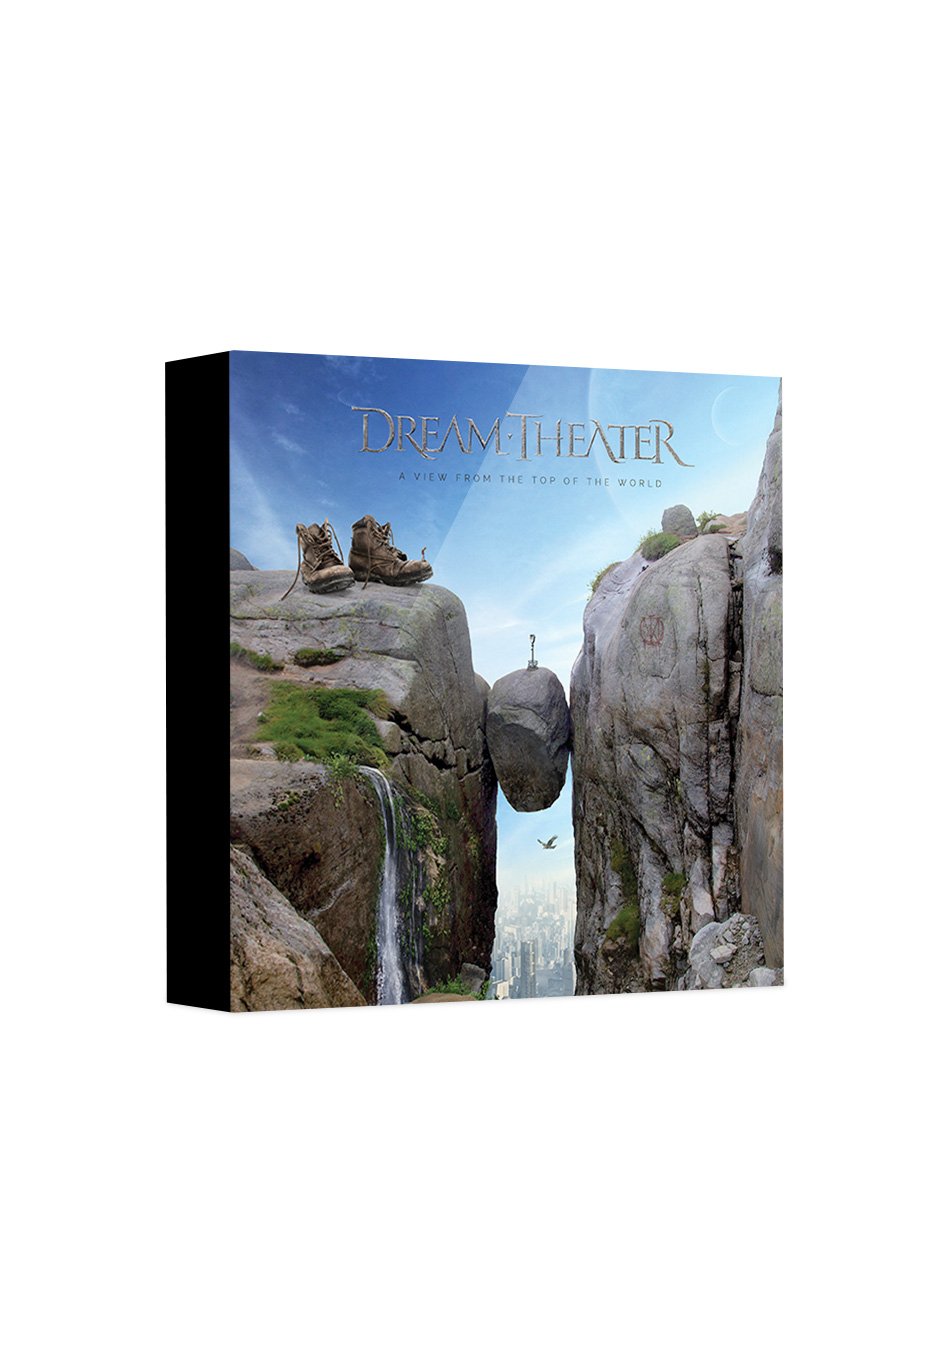 Dream Theater - A View From The Top Of The World Ltd. Deluxe - Box Set